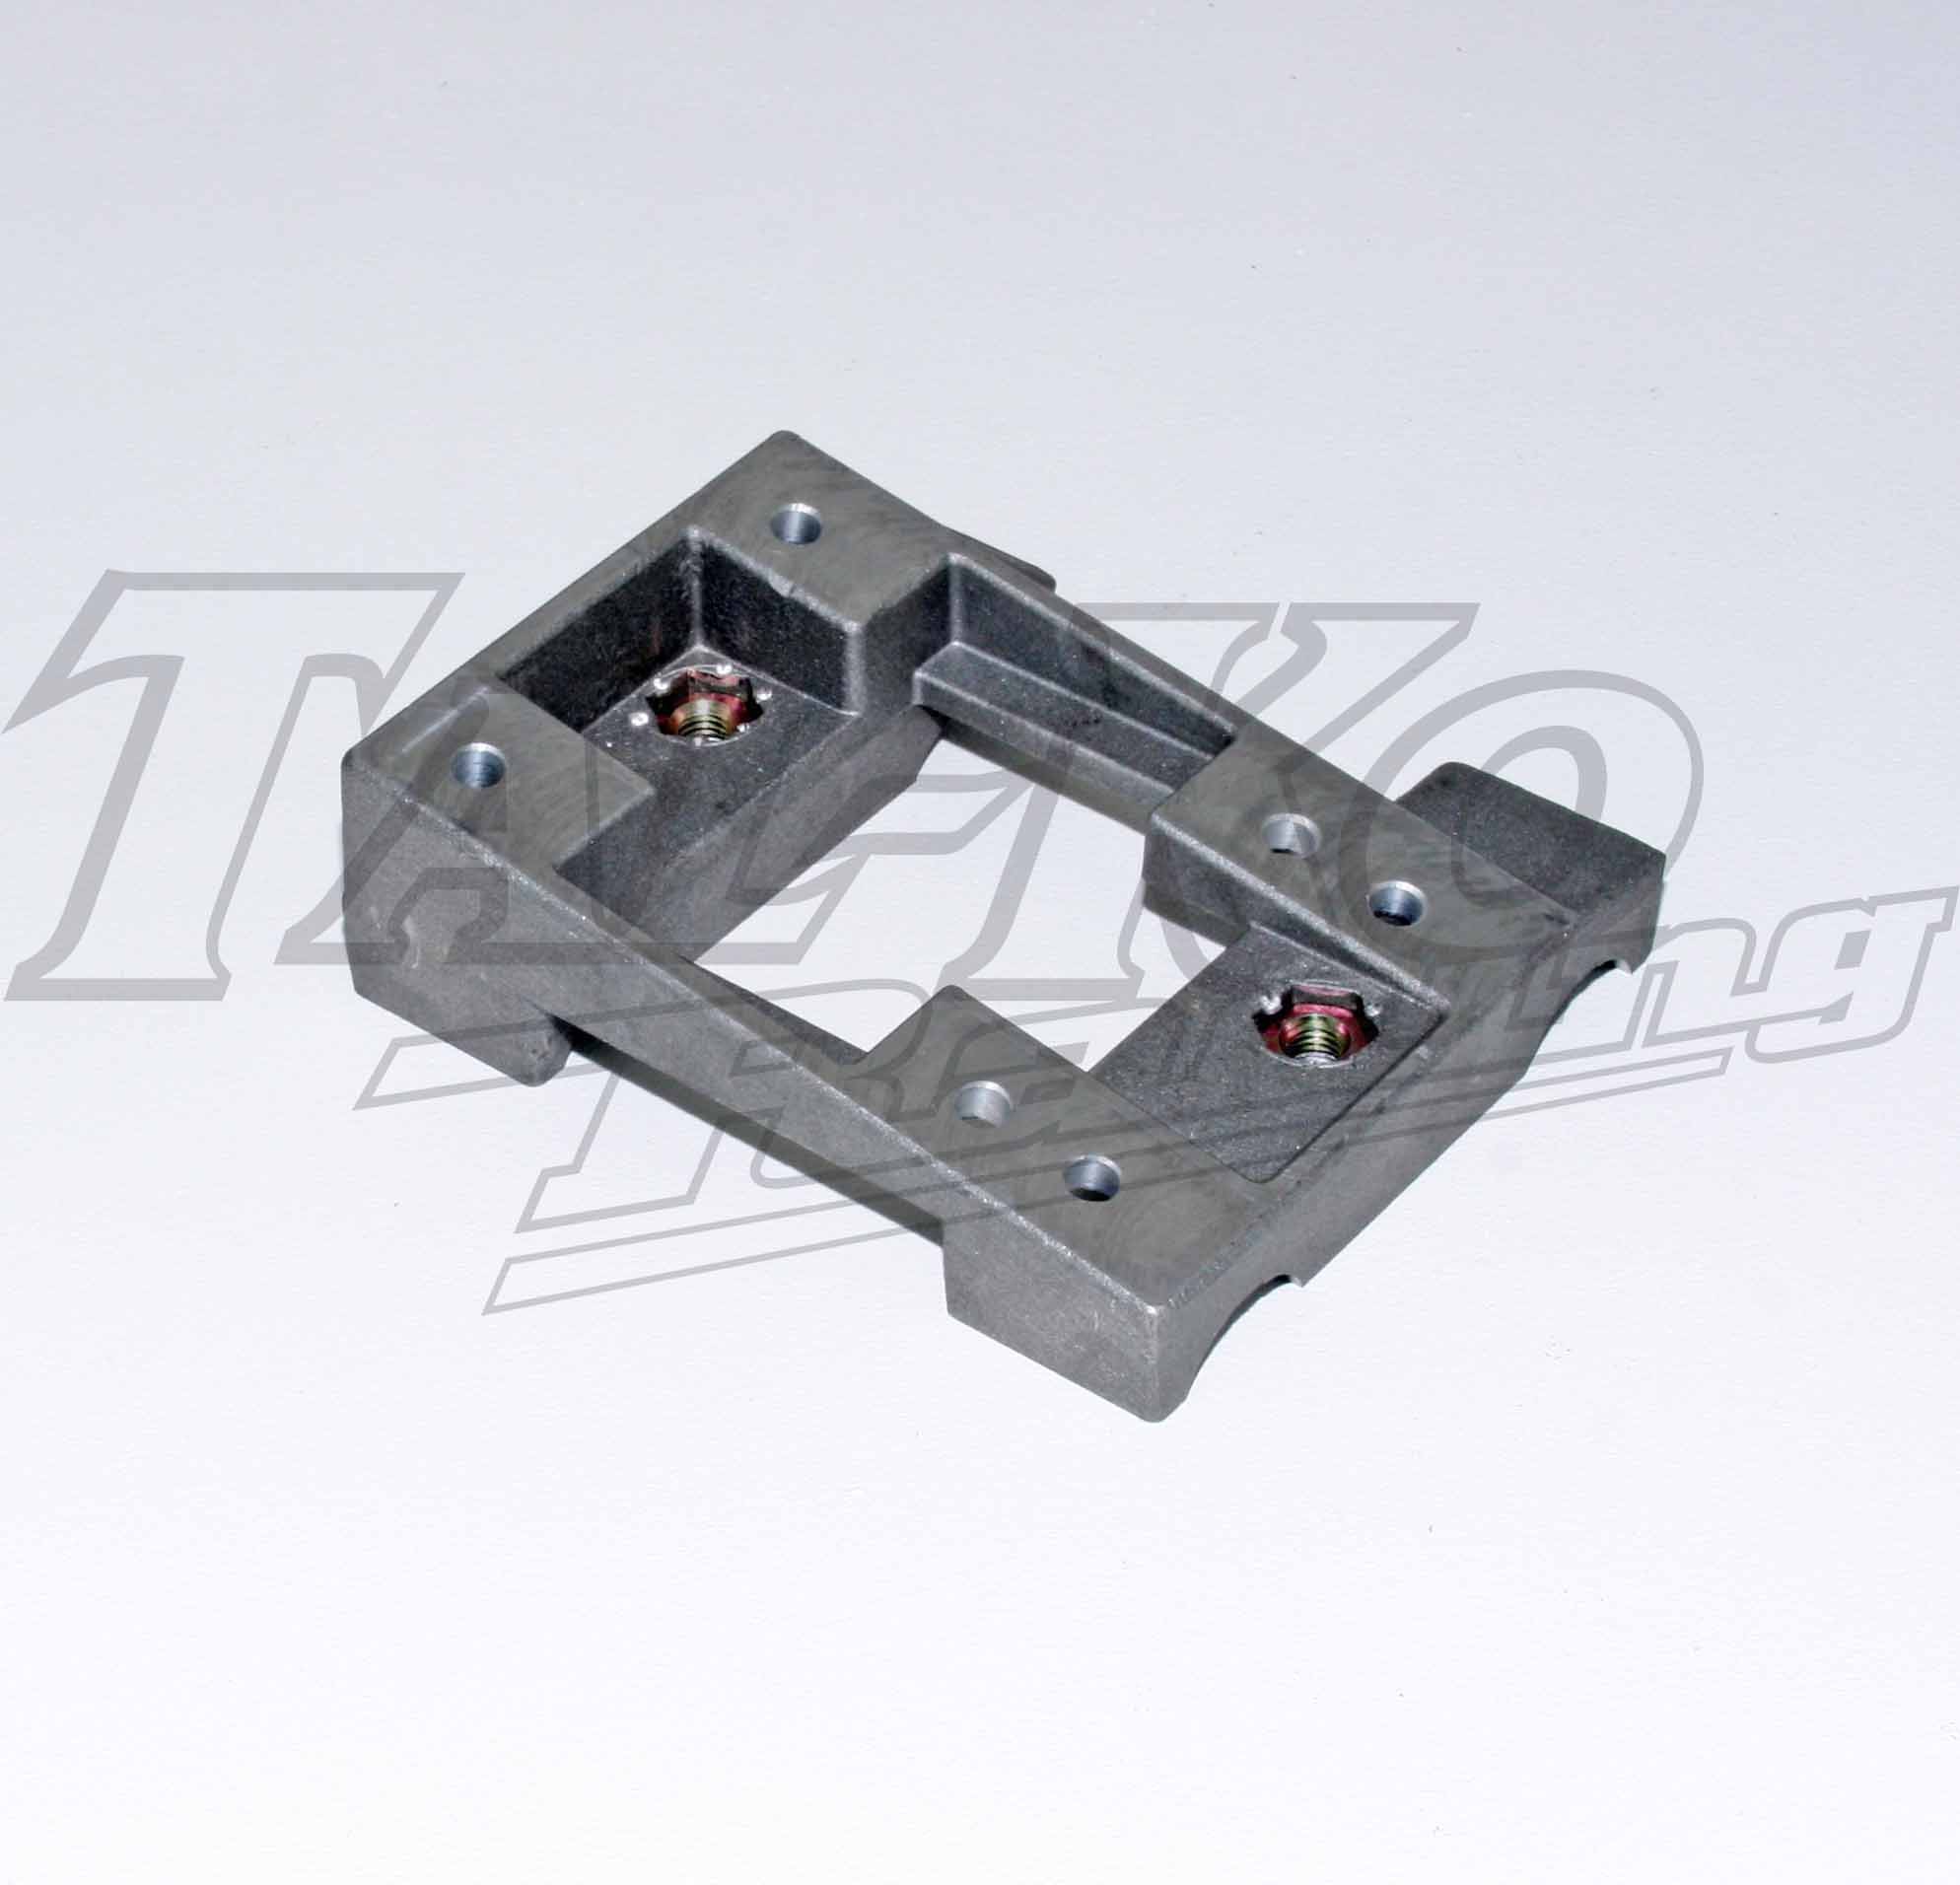 ENGINE MOUNT TOP PLATE PRE-DRILLED  STD 28 X 91/92MM DUAL FIT